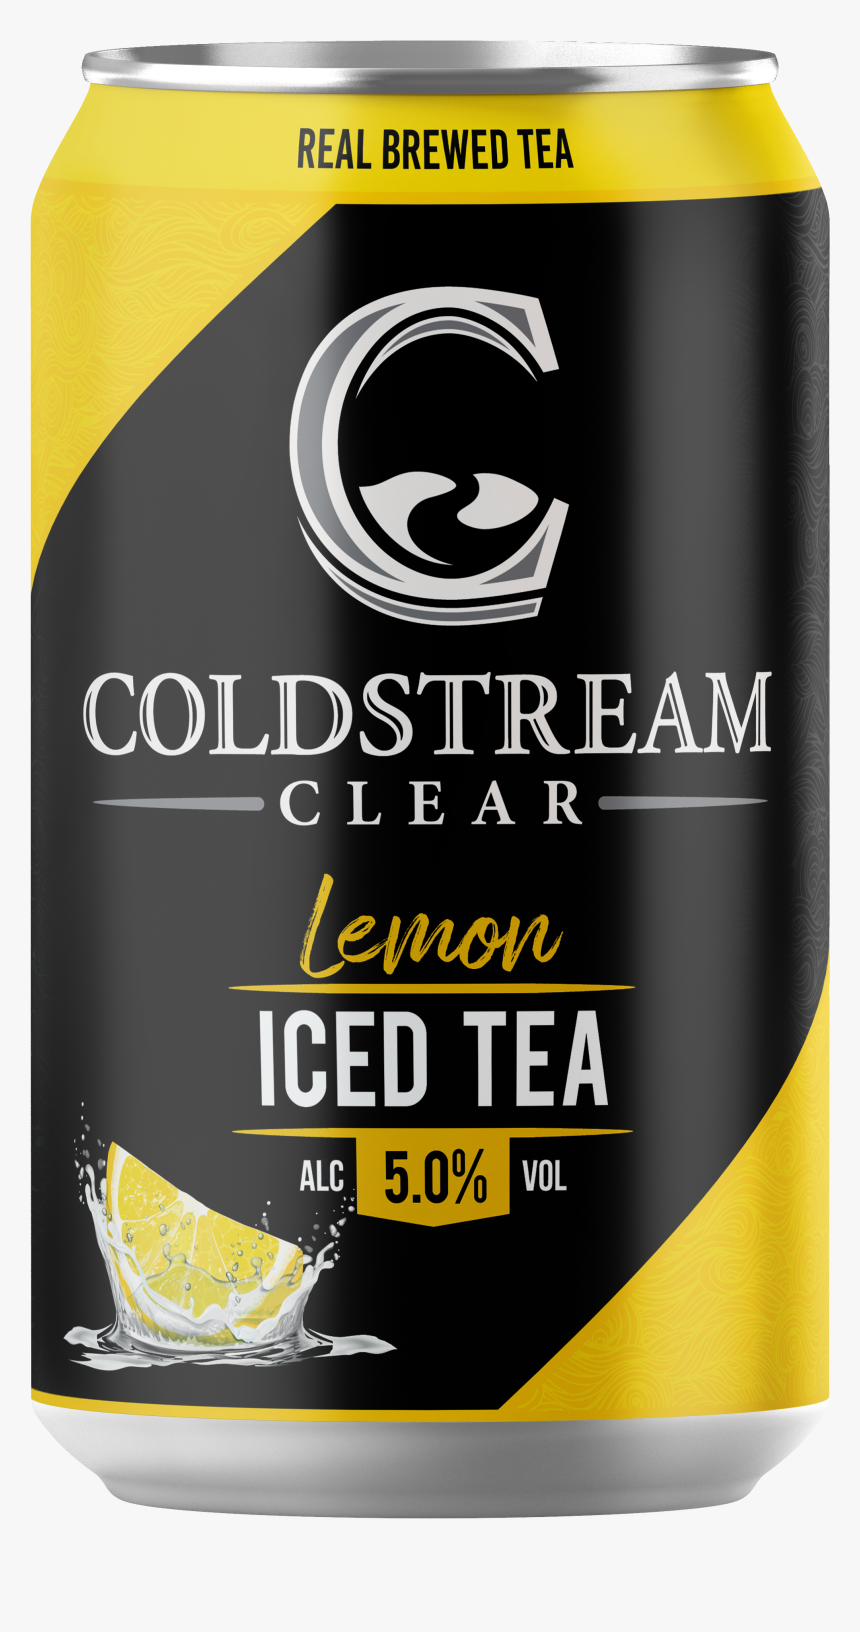 Coldstream Peach Iced Tea, HD Png Download, Free Download